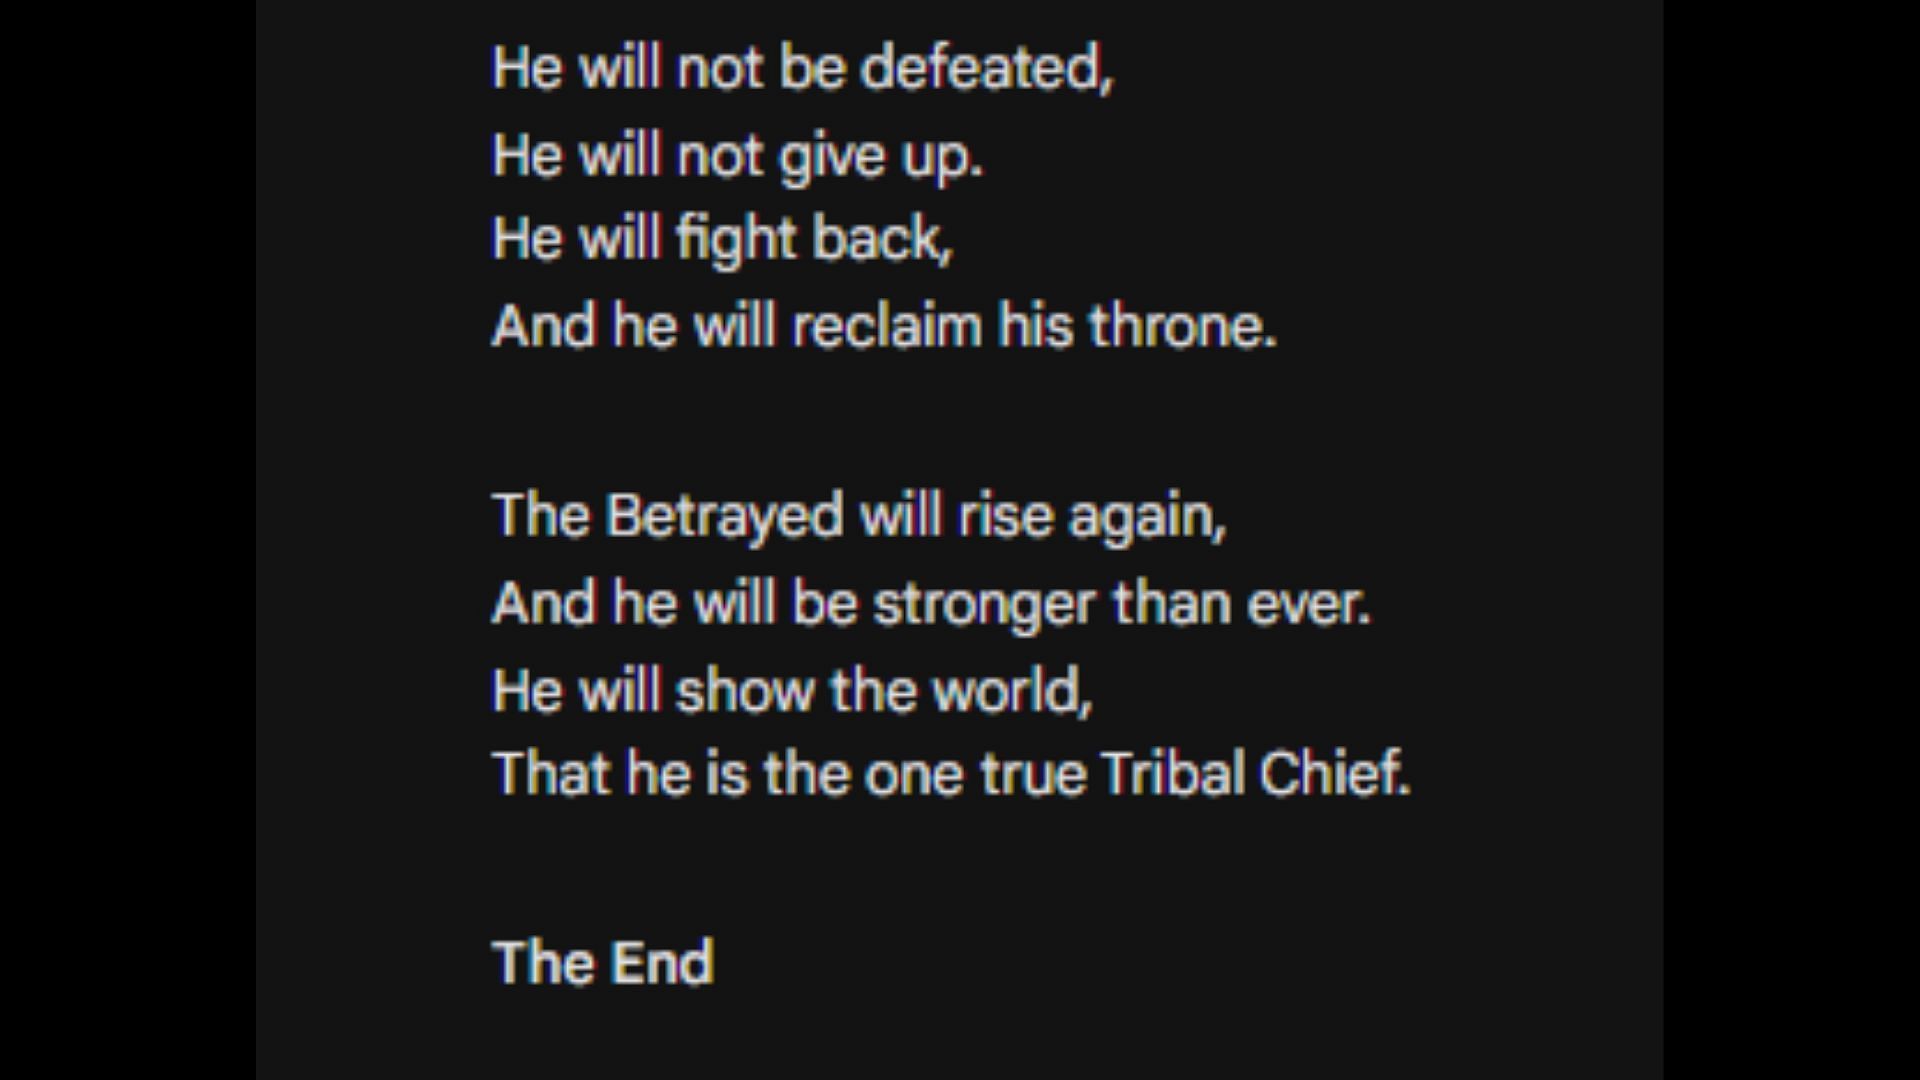 The second half of the poem &quot;The Betrayed&quot;